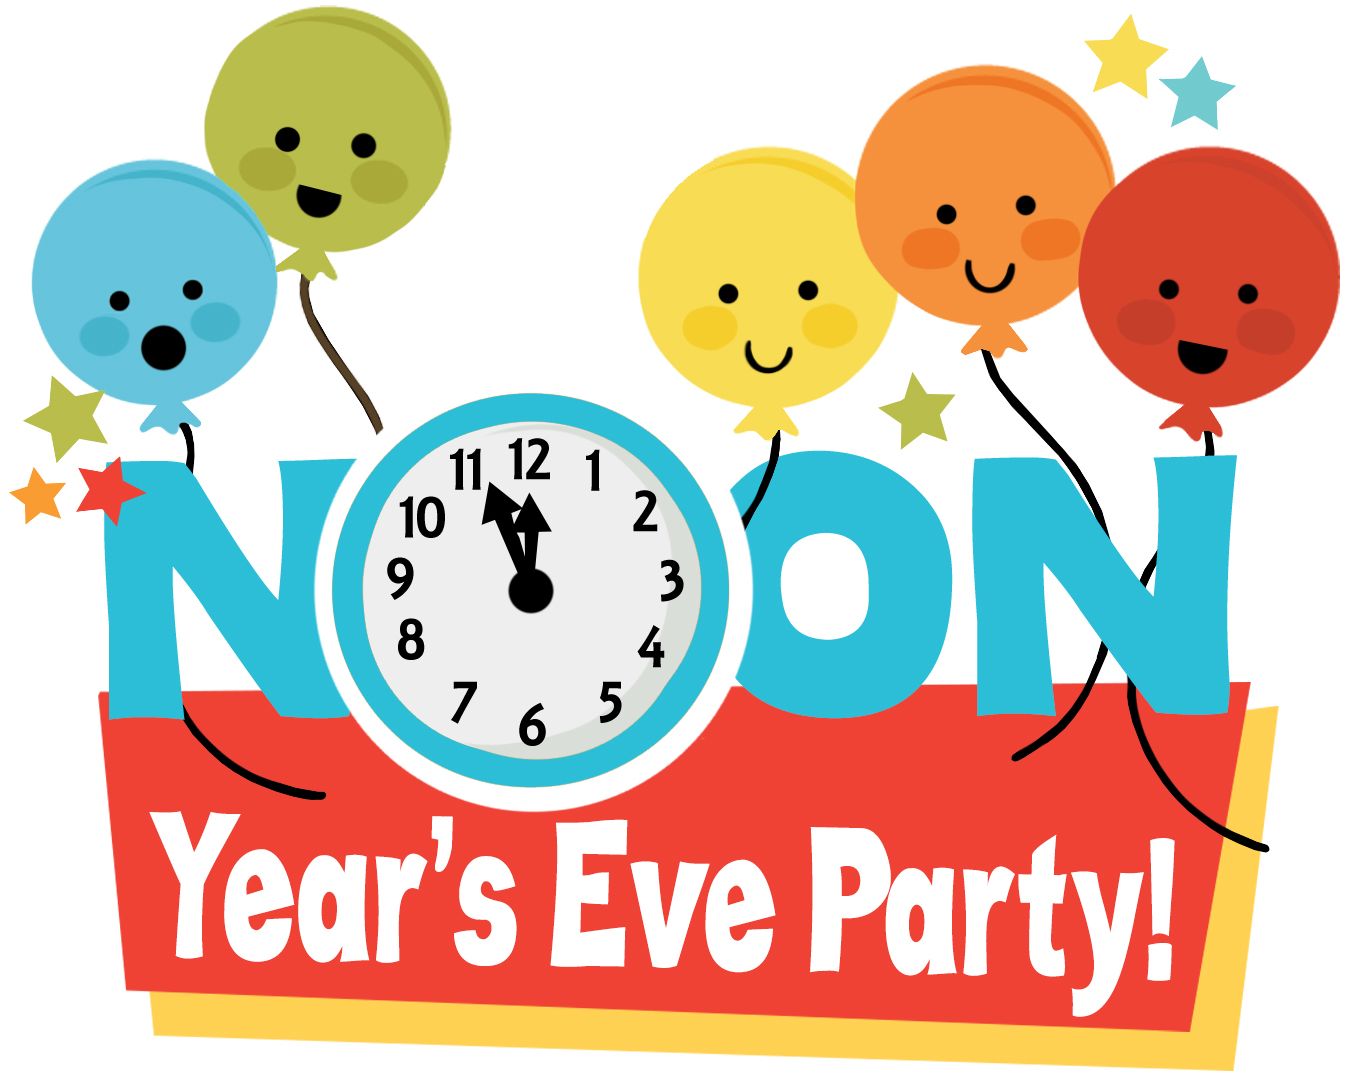 noon year's eve party image